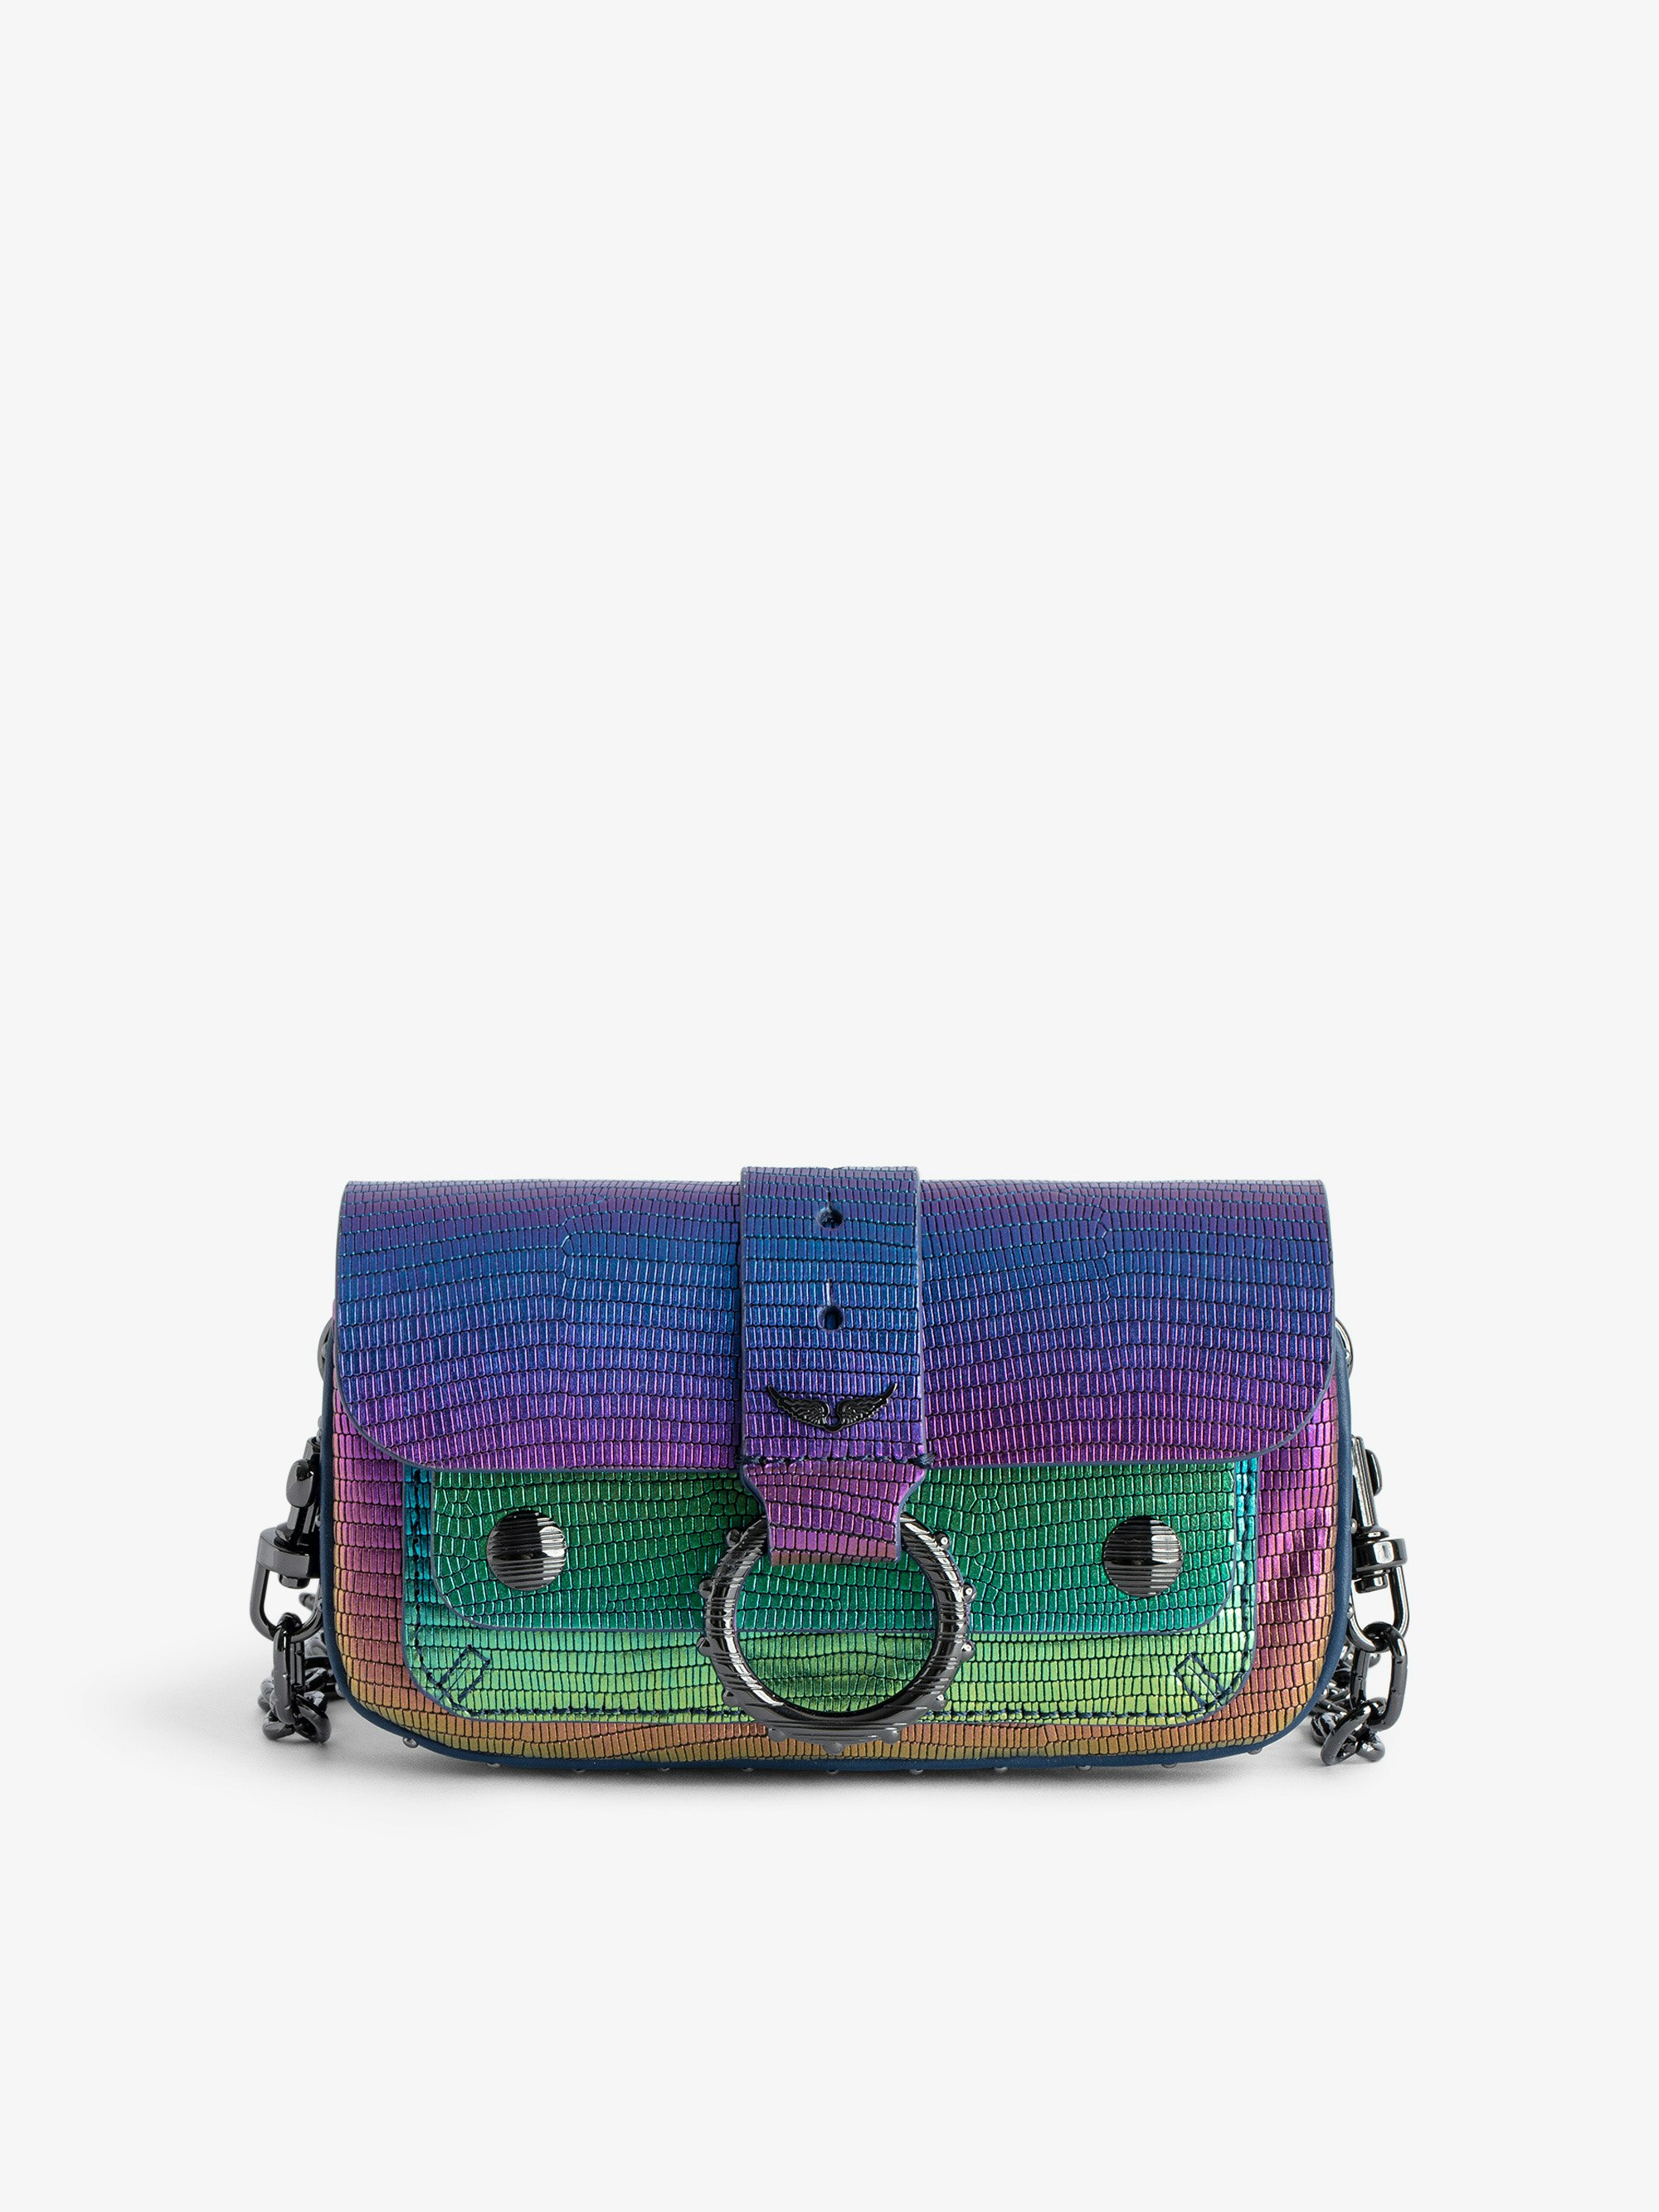 Kate Wallet Embossed Metallic Bag - Designed by Kate Moss for Zadig&Voltaire.  Women’s rainbow iguana-embossed metallic leather mini bag with metal chain and leather loop.